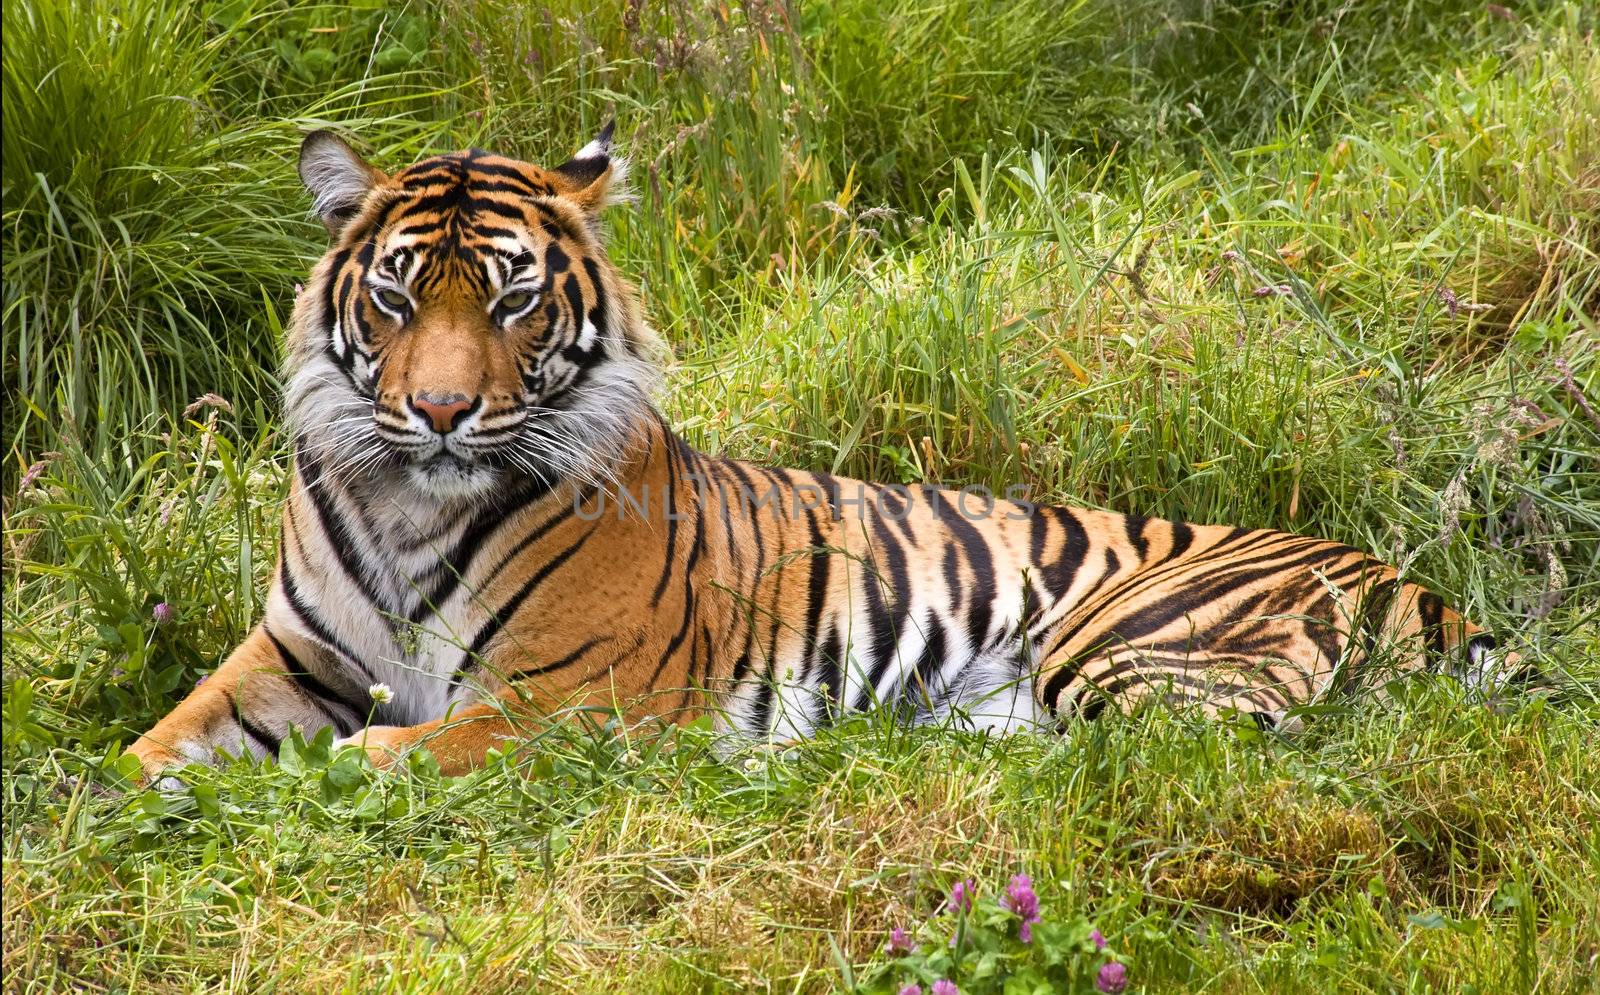 Large Striped Sumatran Tiger Relaxing in Grass by bill_perry